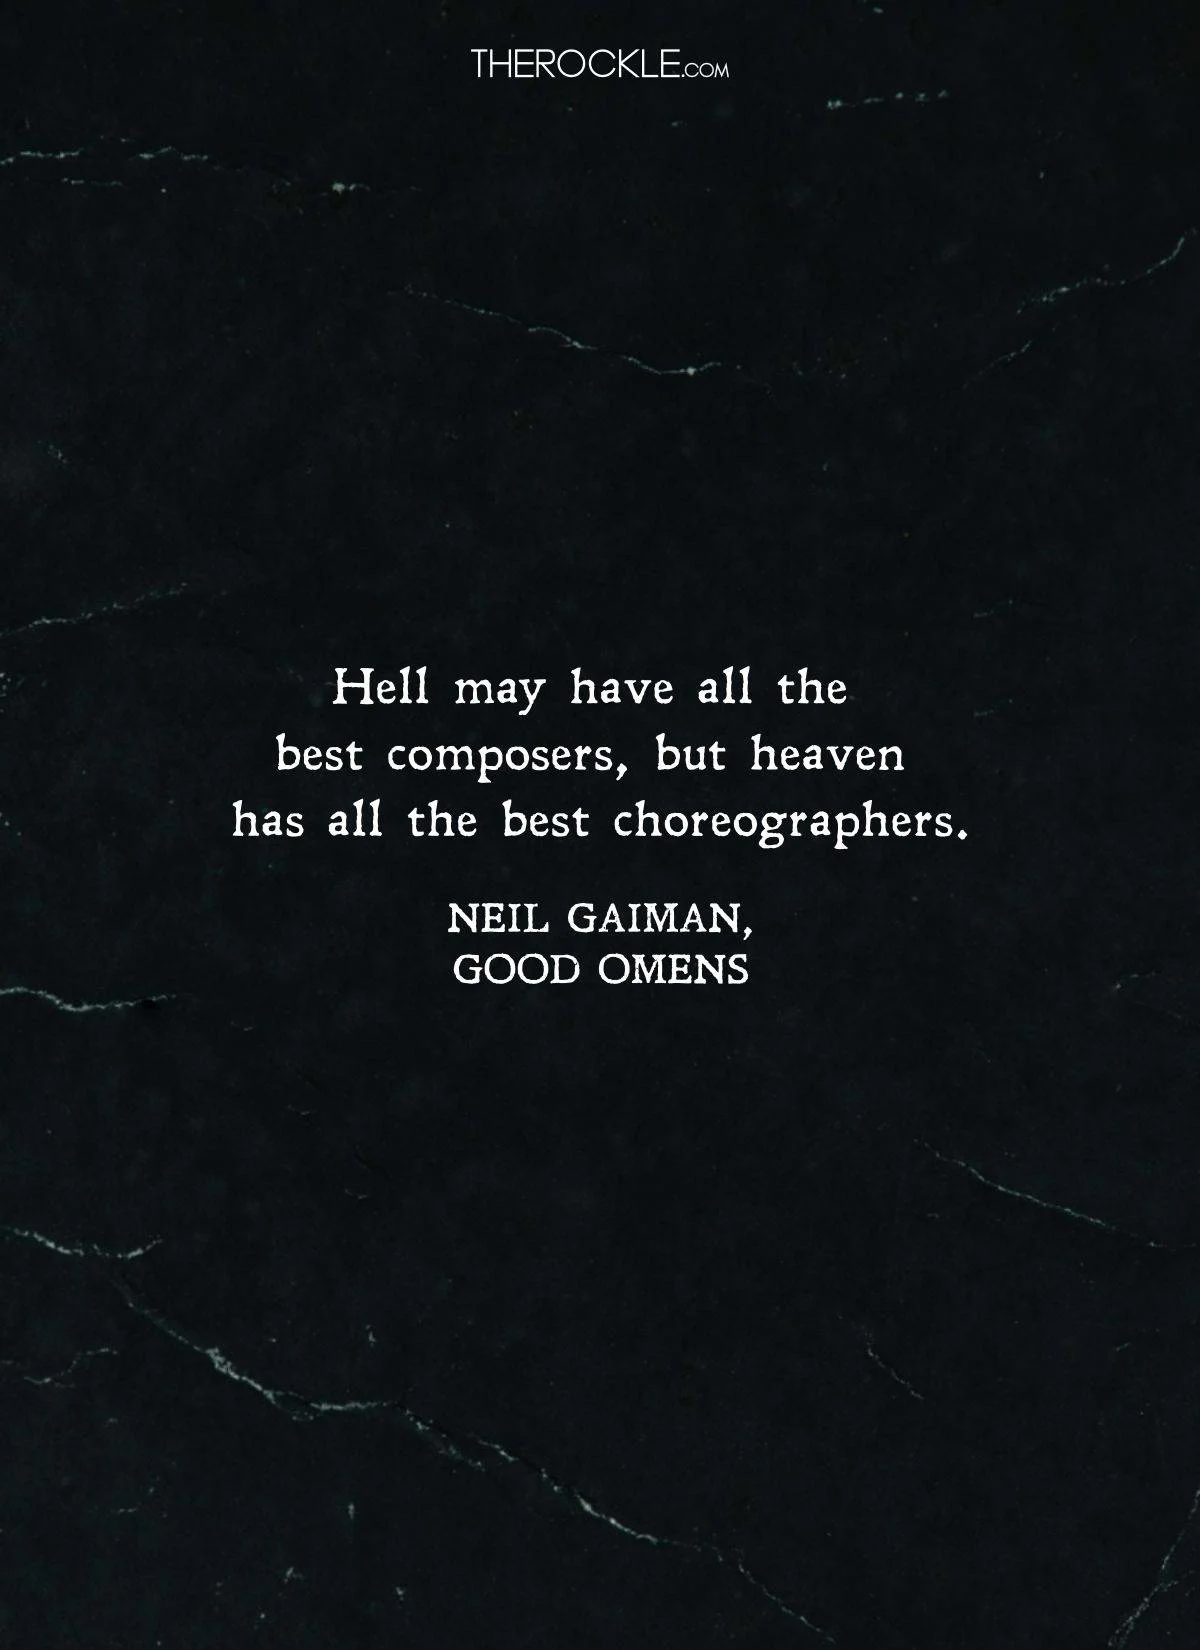 Gaiman's funny quote about heaven and hell